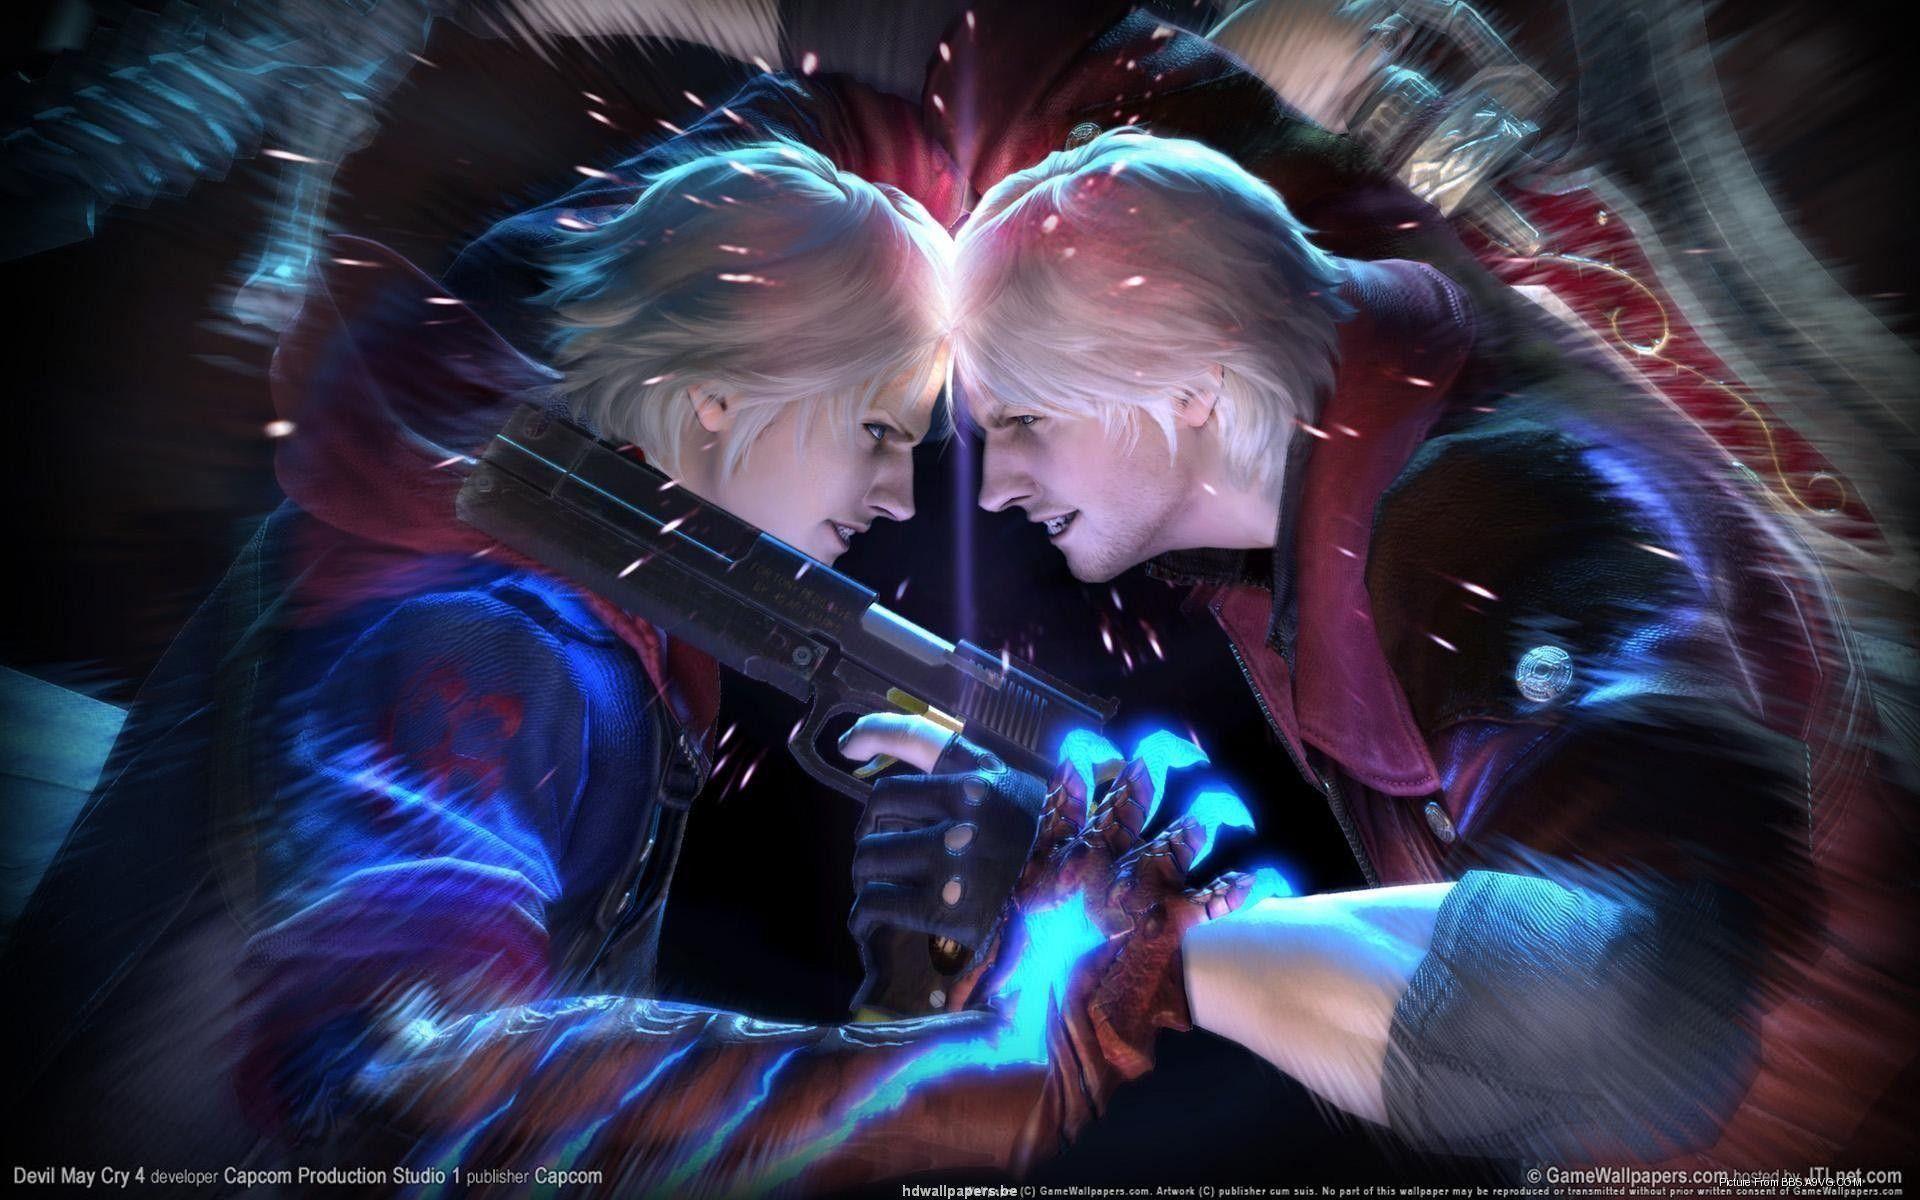 Devil May Cry 5 Wallpapers Top Free Devil May Cry 5 Backgrounds Wallpaperaccess